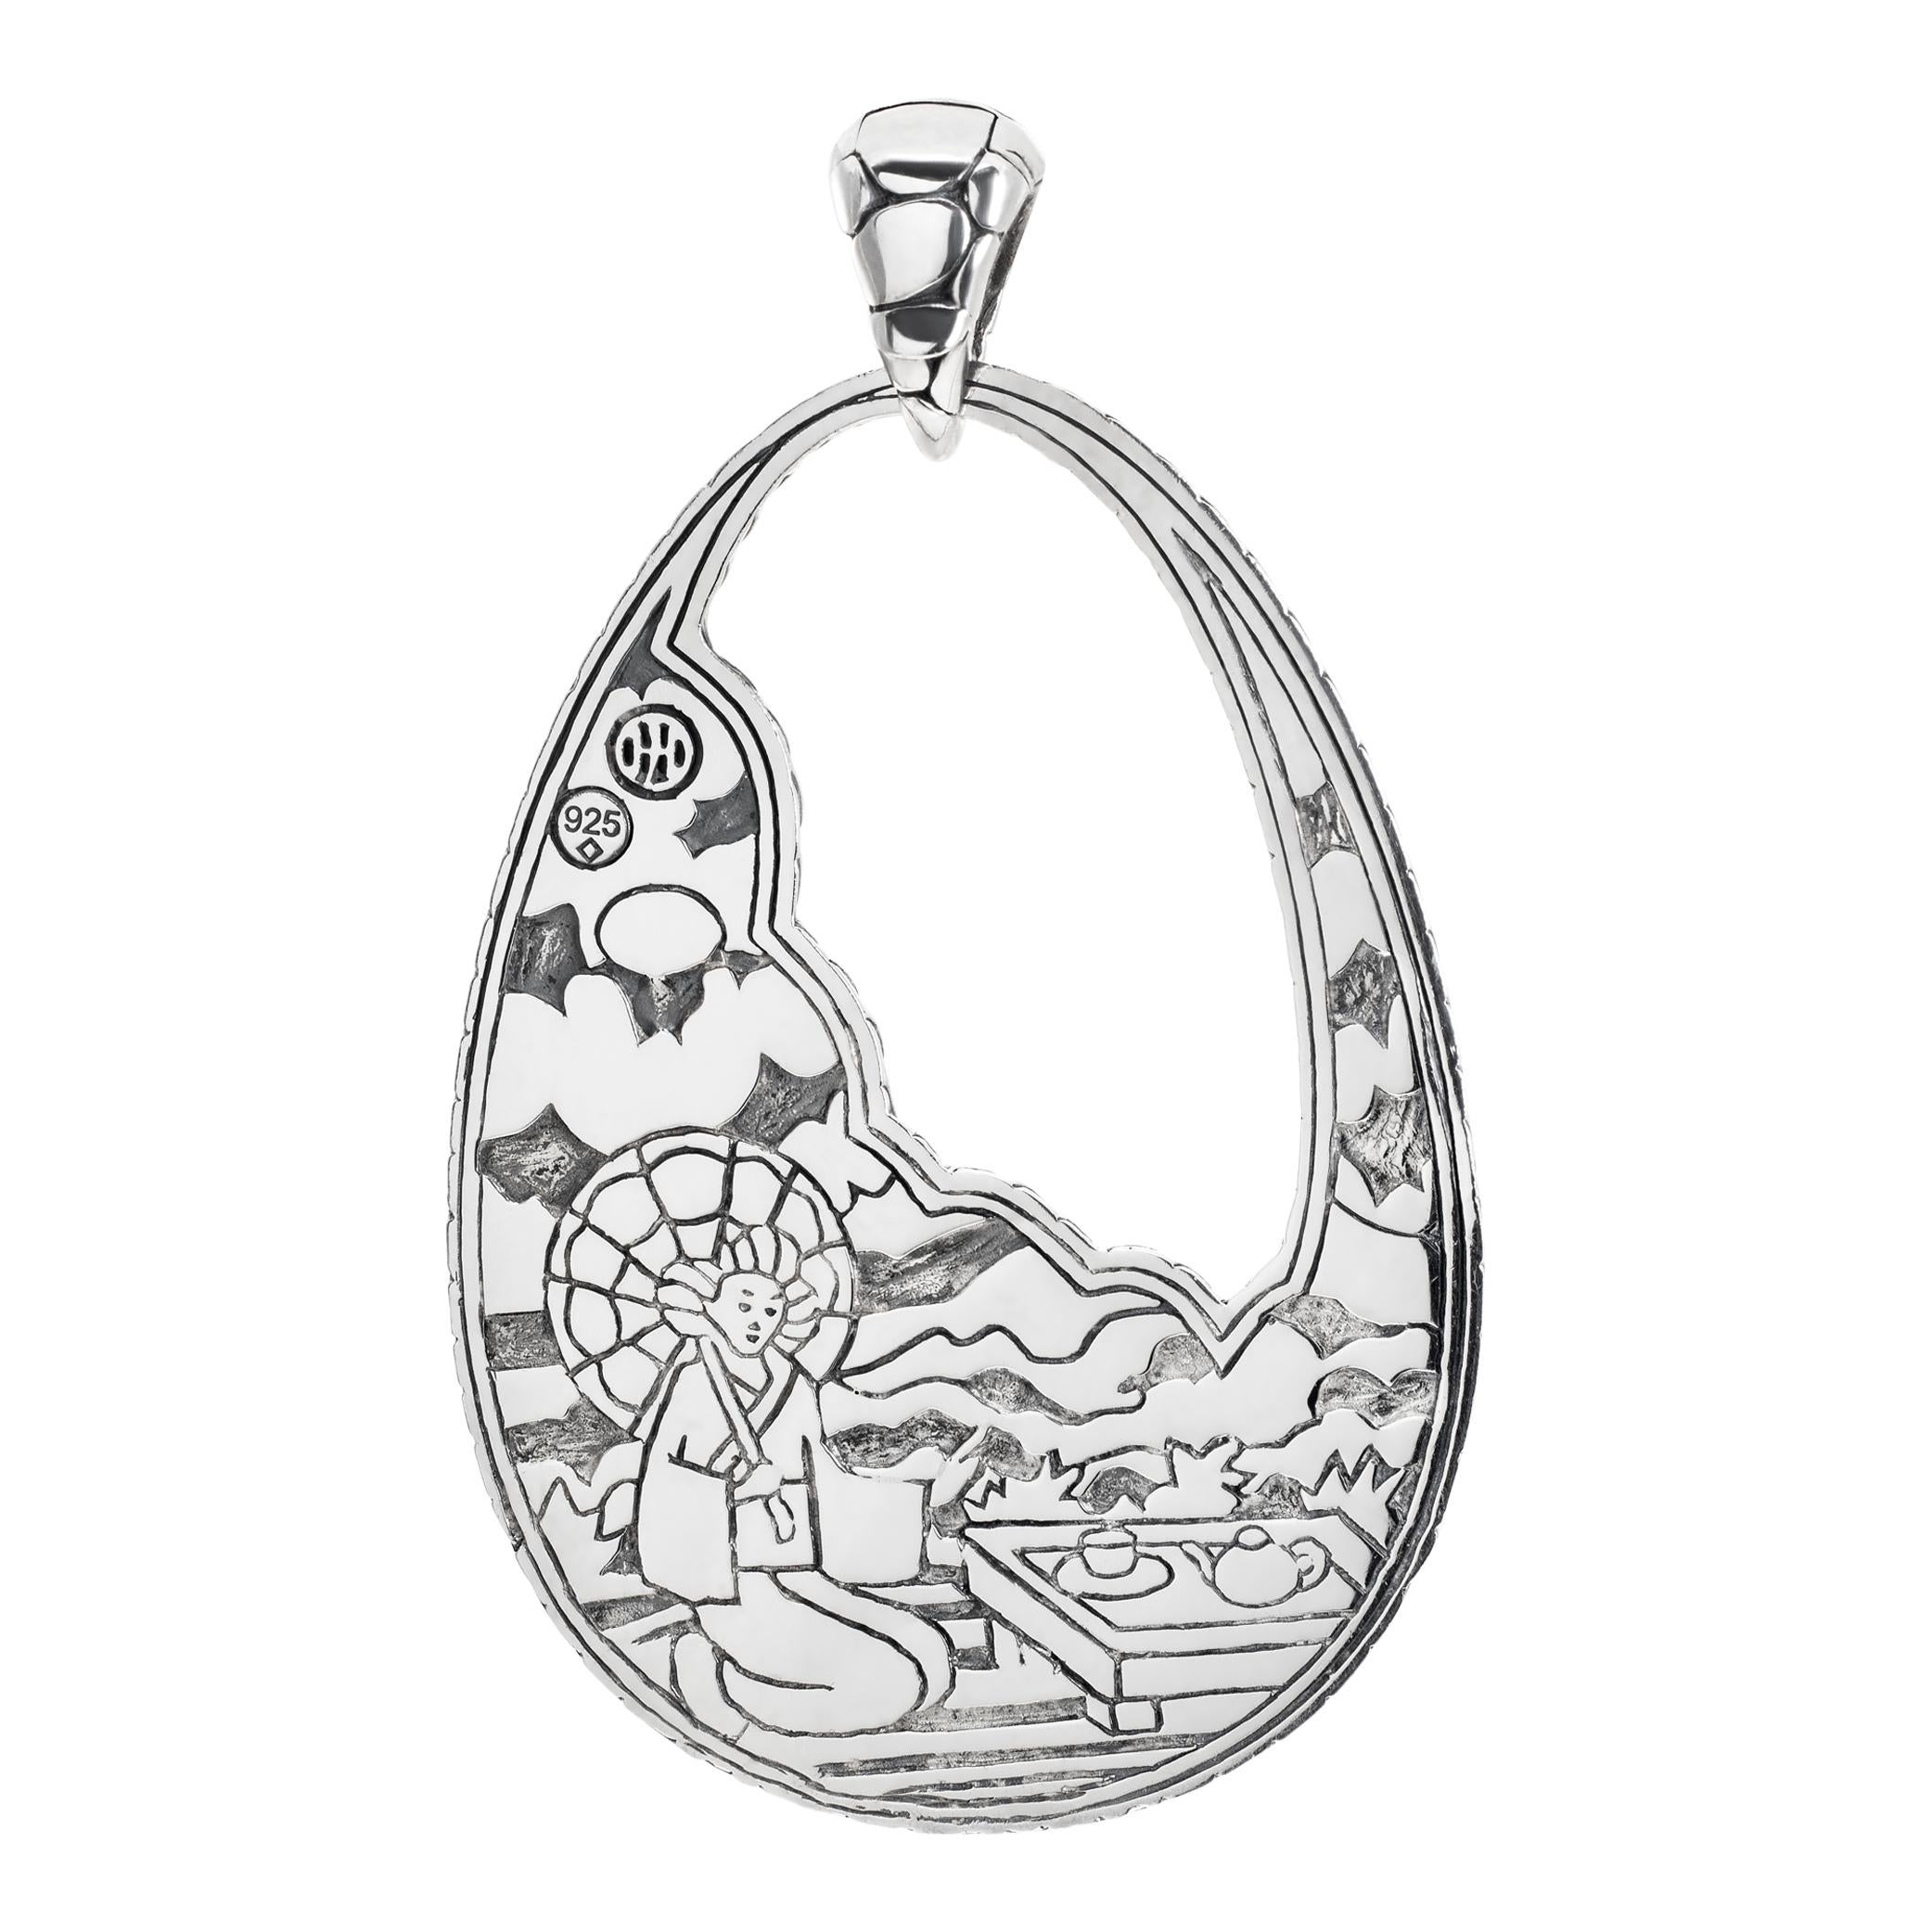 John Hardy Kali Collection Pendant in Sterling Silver. Hanging length 2.70 inches, width 1.92 inches.